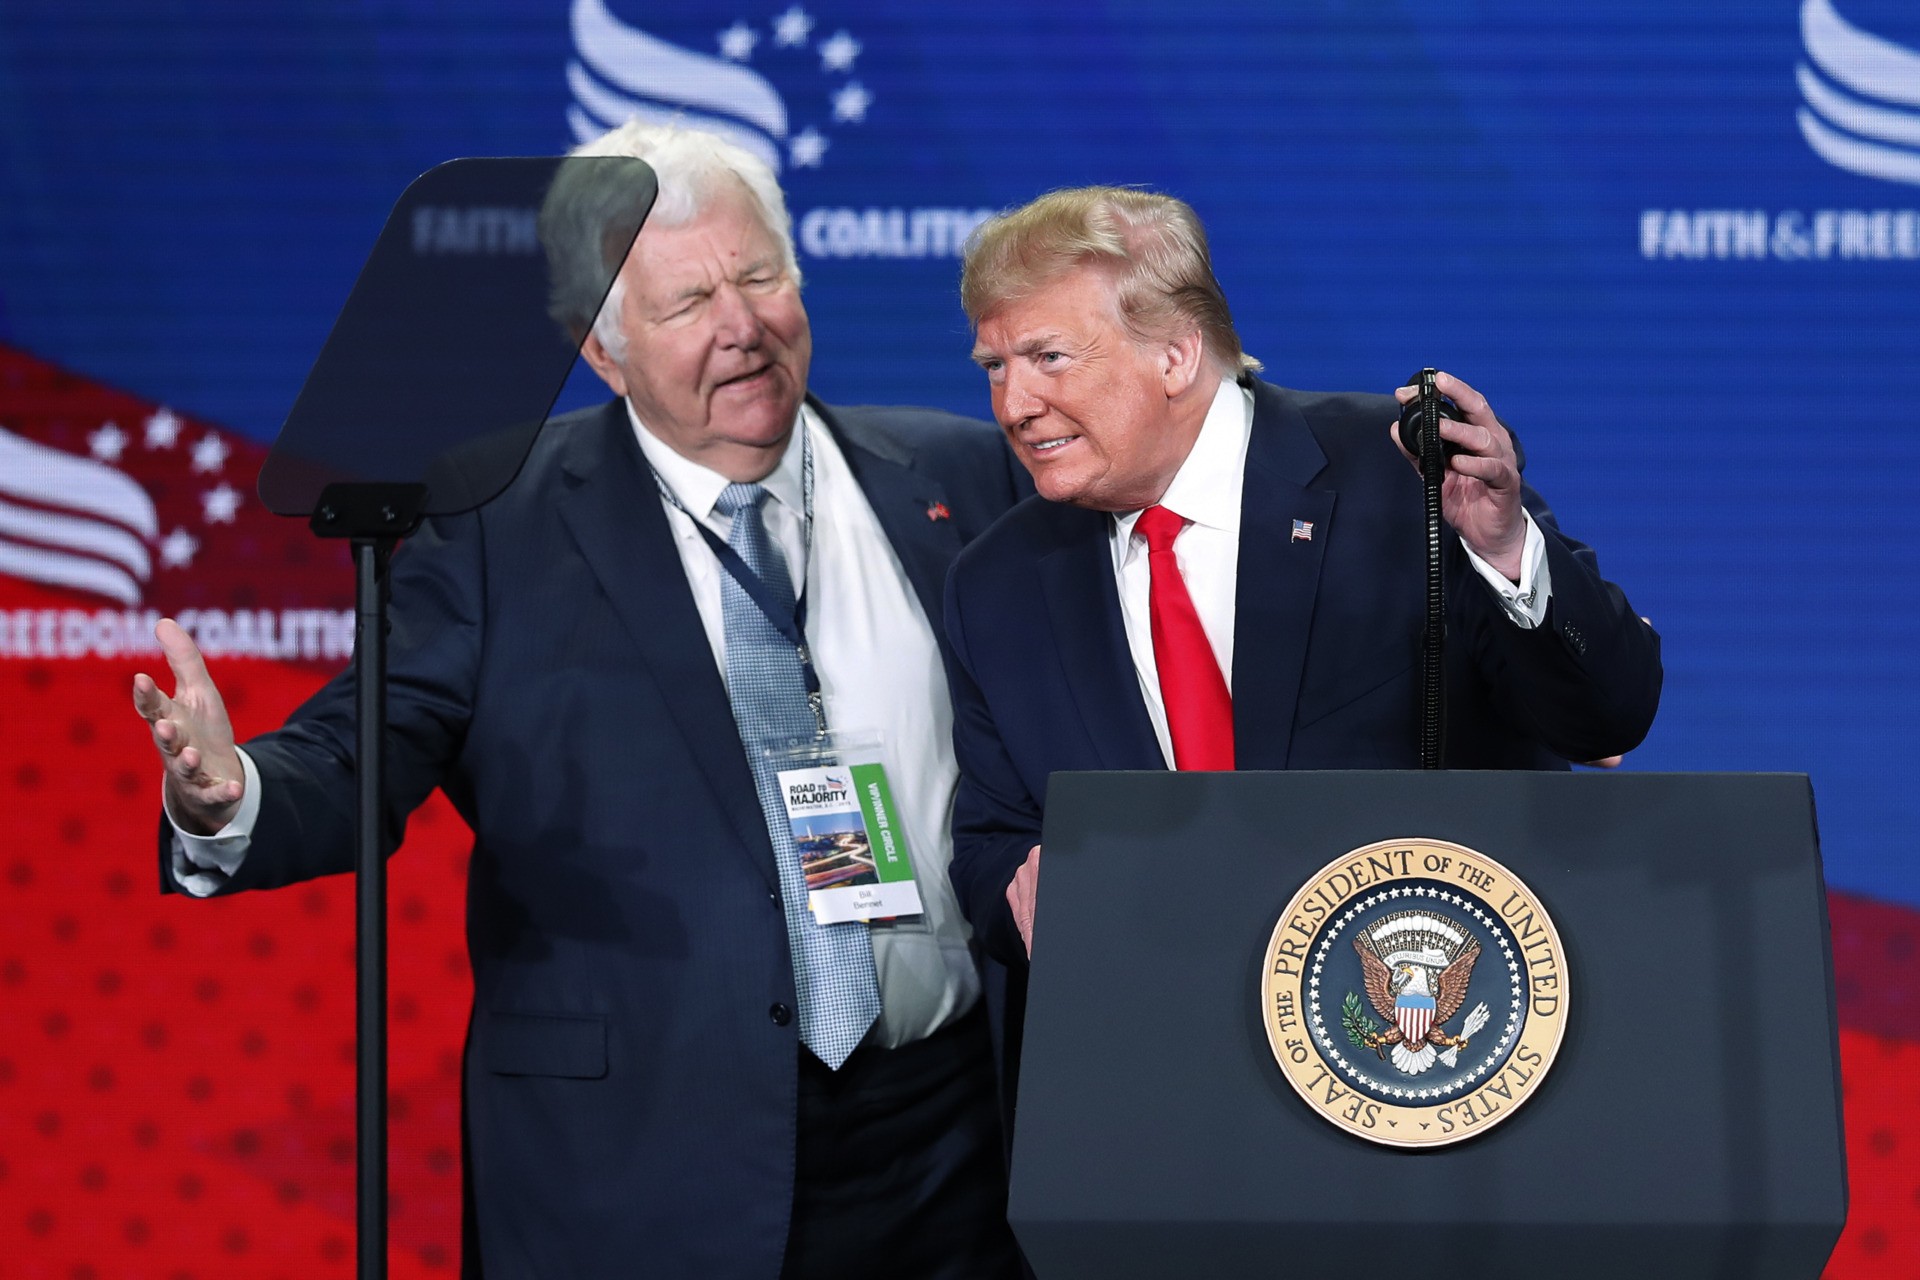 Former Secretary of Education, William J. Bennett, left, joins President Donald Trump on stage to speak at the Faith & Freedom Coalition conference in Washington, Wednesday, June 26, 2019. (AP Photo/Pablo Martinez Monsivais)